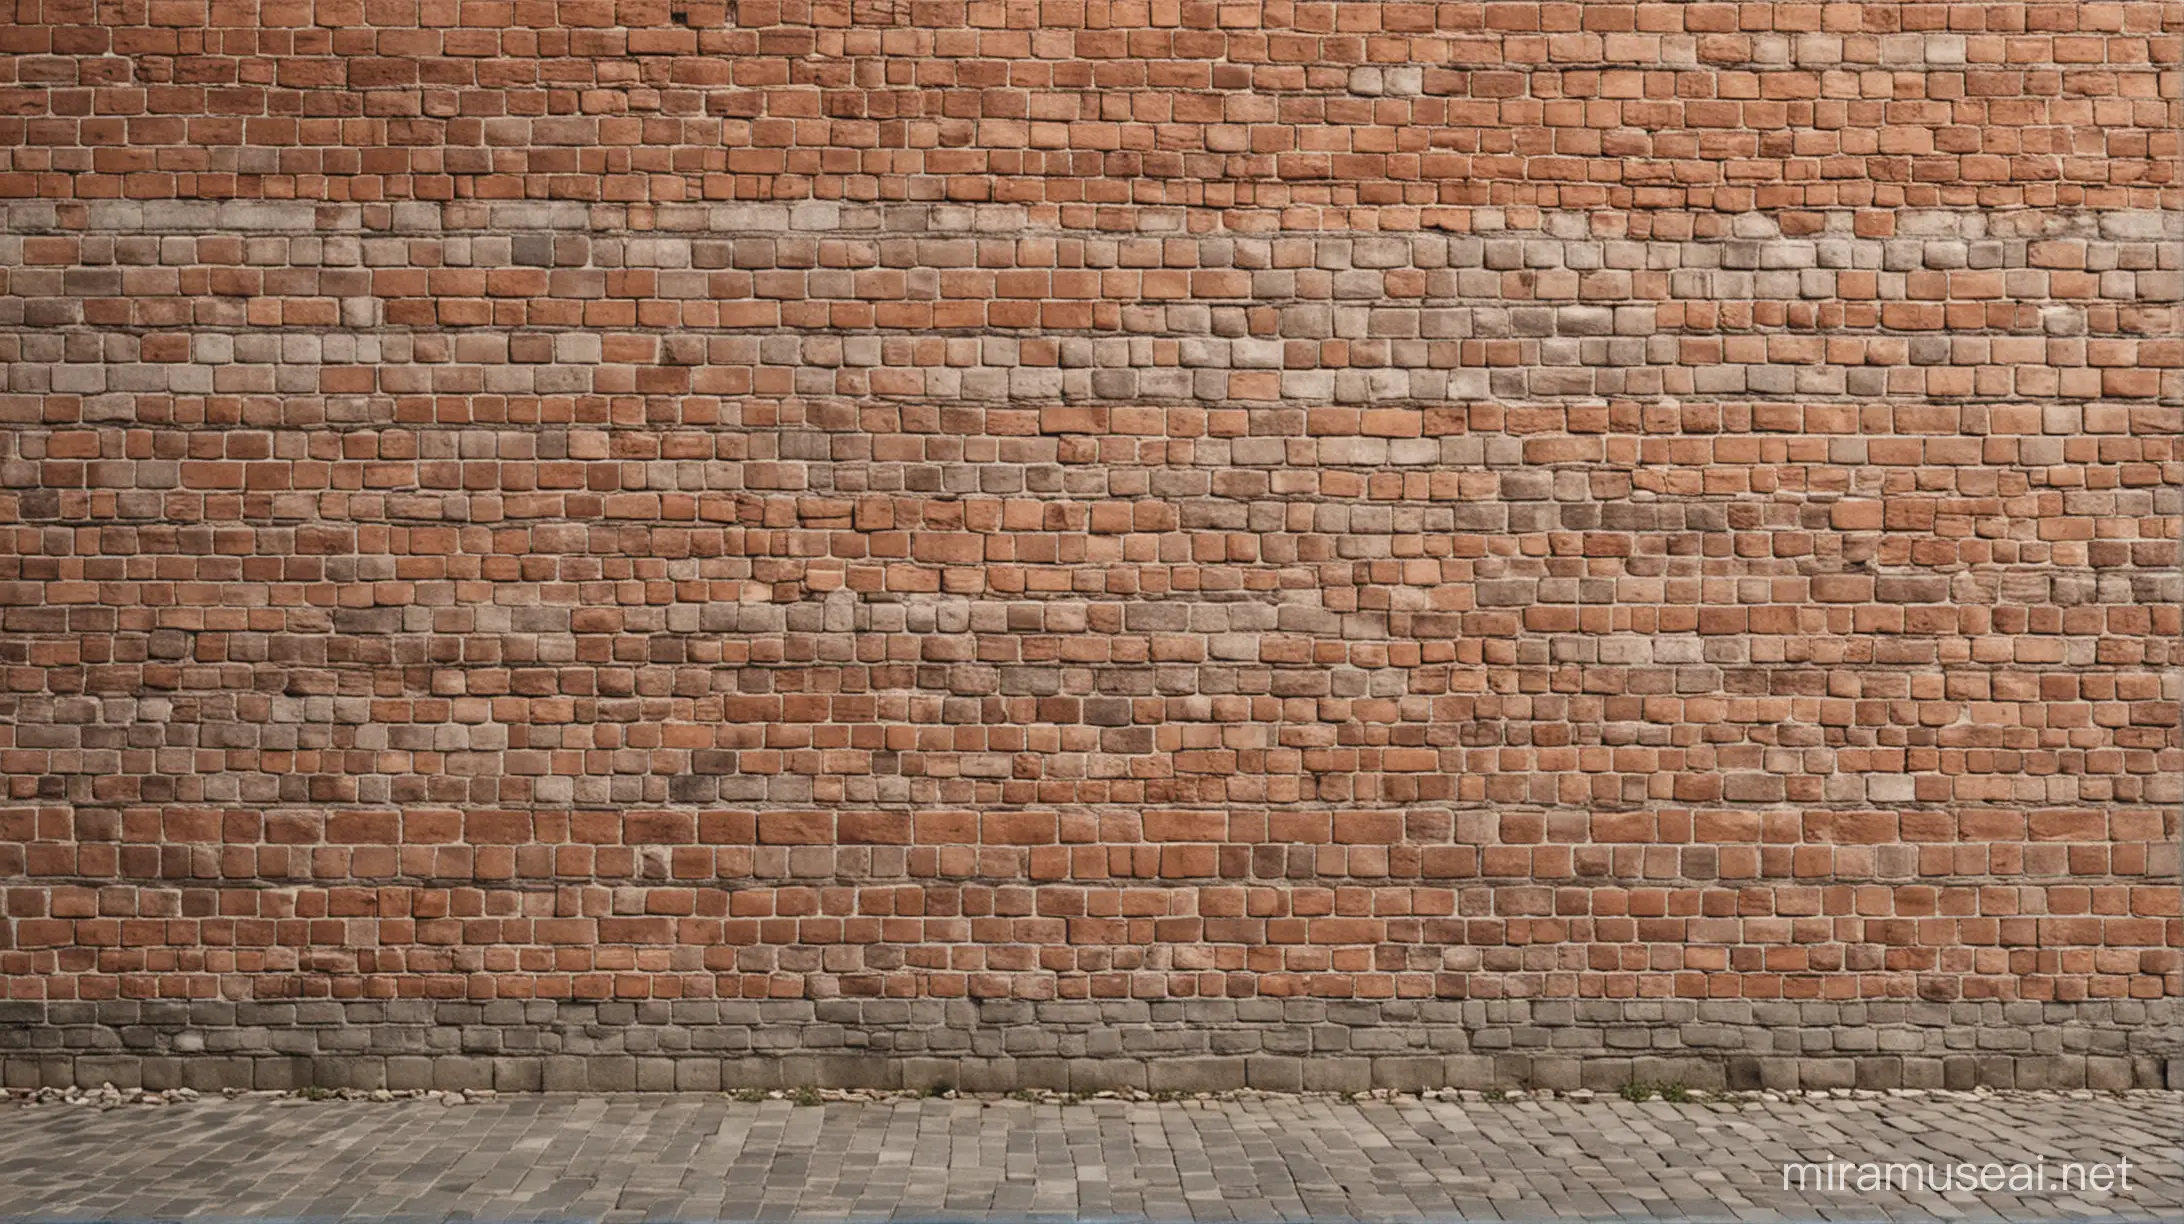 Weathered Brick Wall in Alley Side Realistic Urban Setting in Daylight